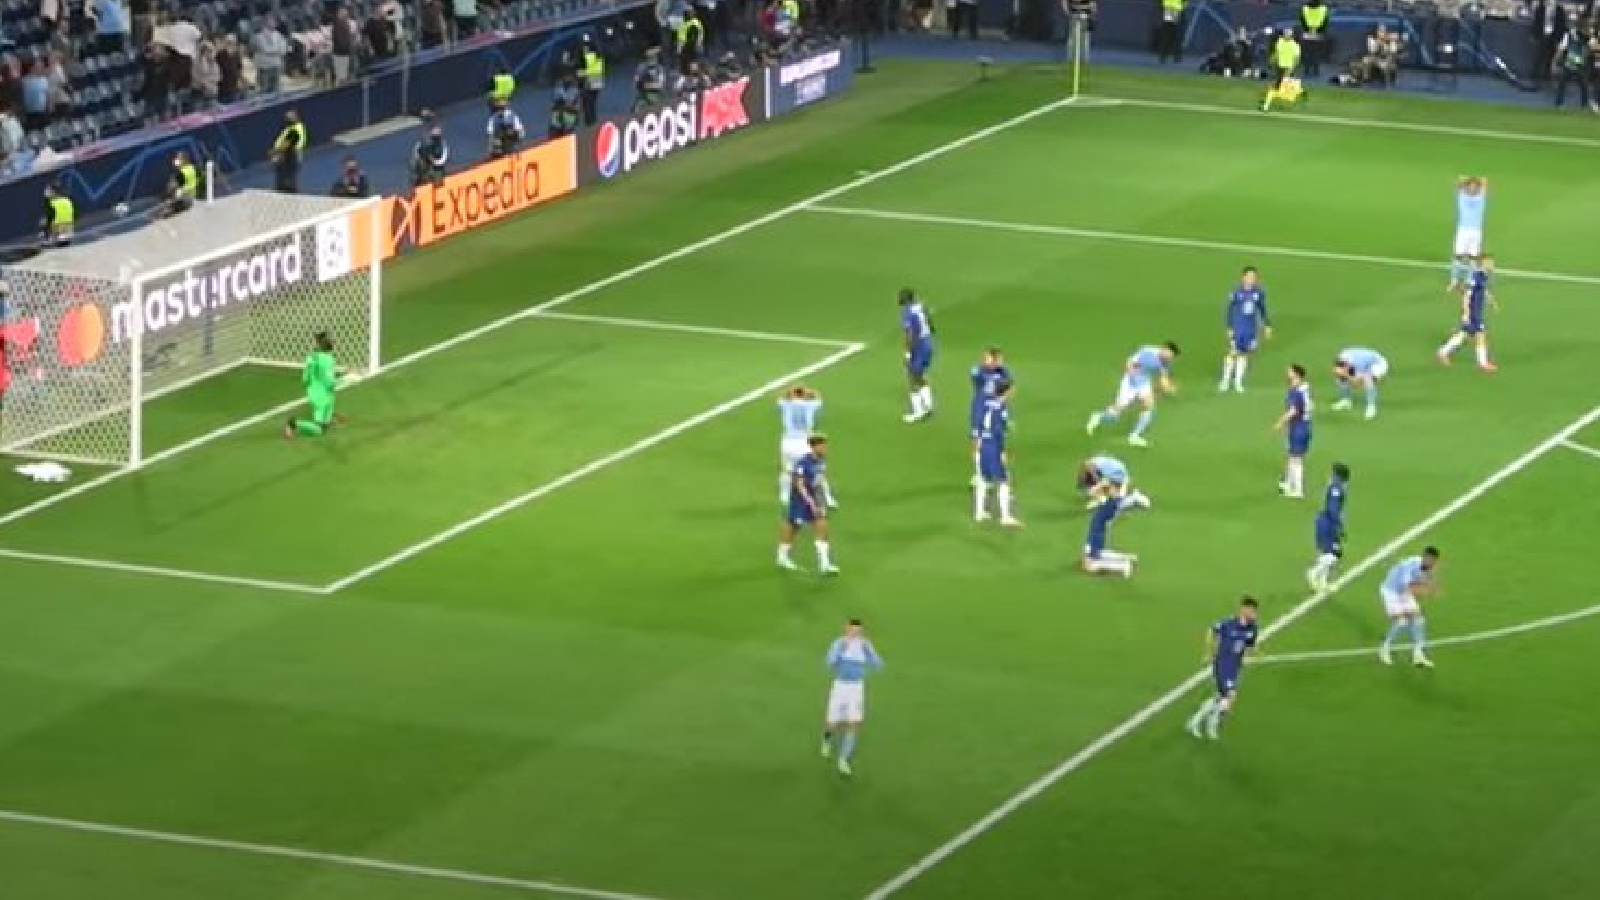 Manchester City players react dramatically after missing a chance against Chelsea